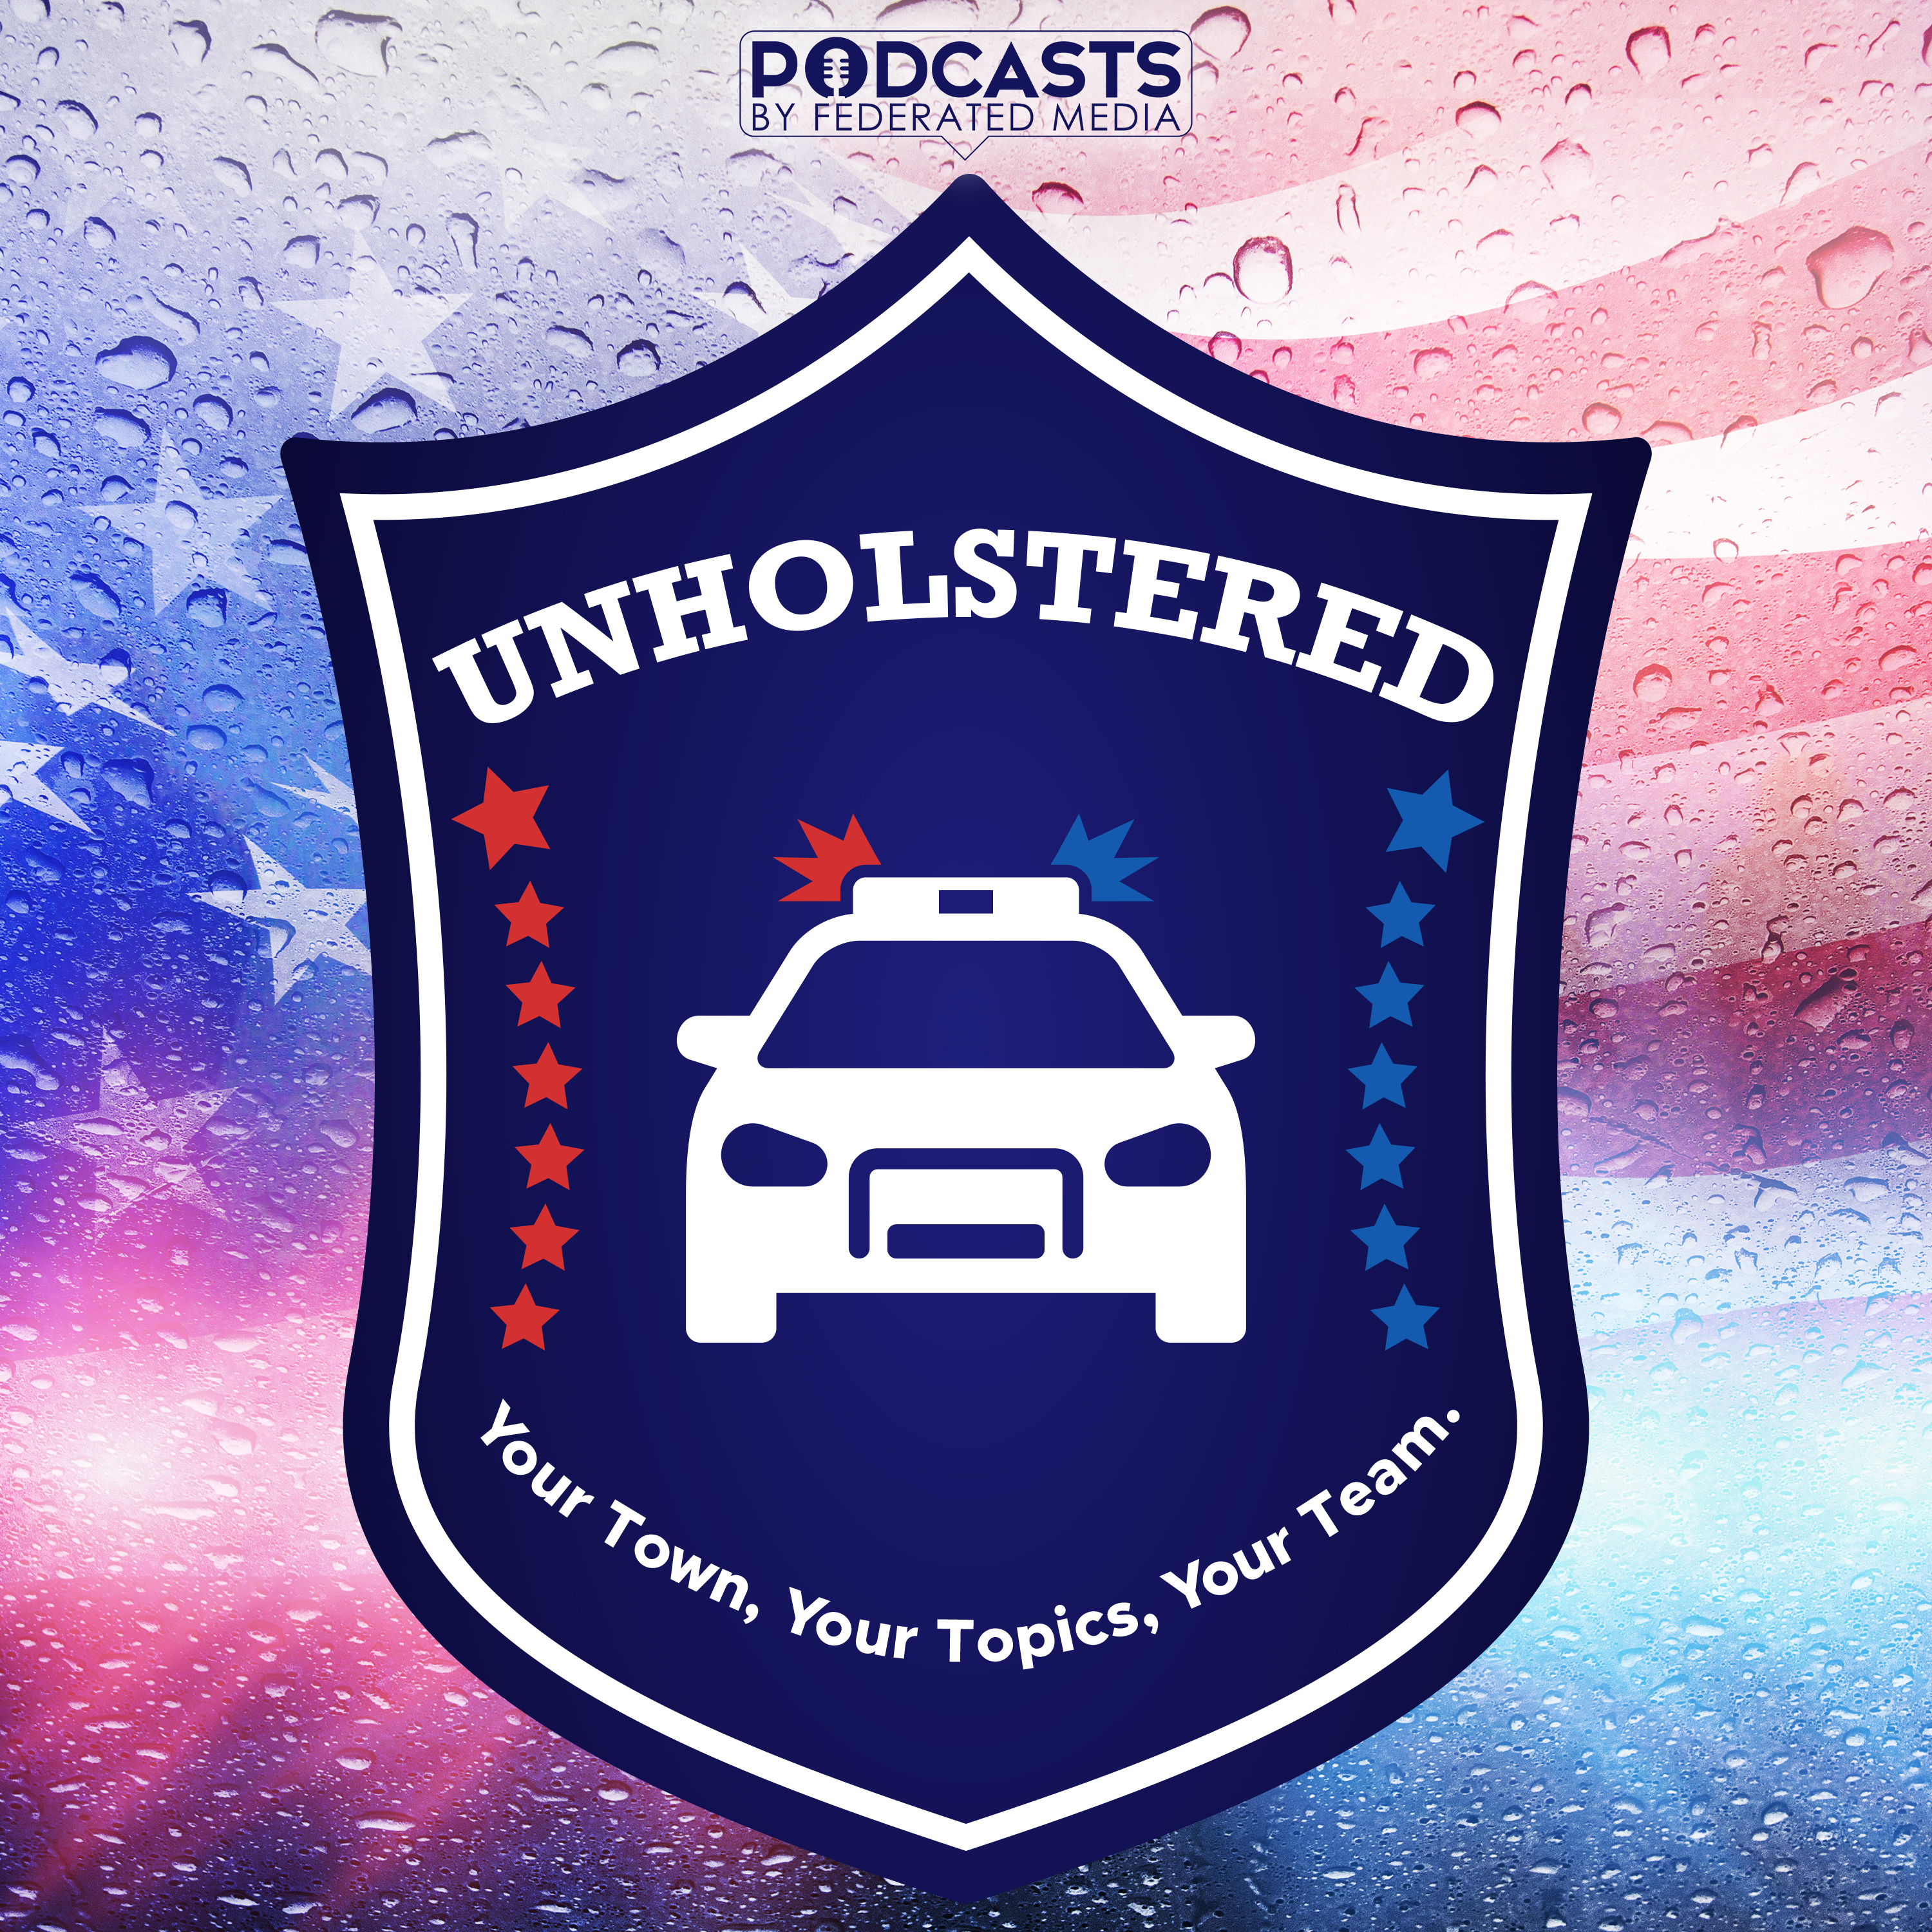 Ep 73: Police Use of Force